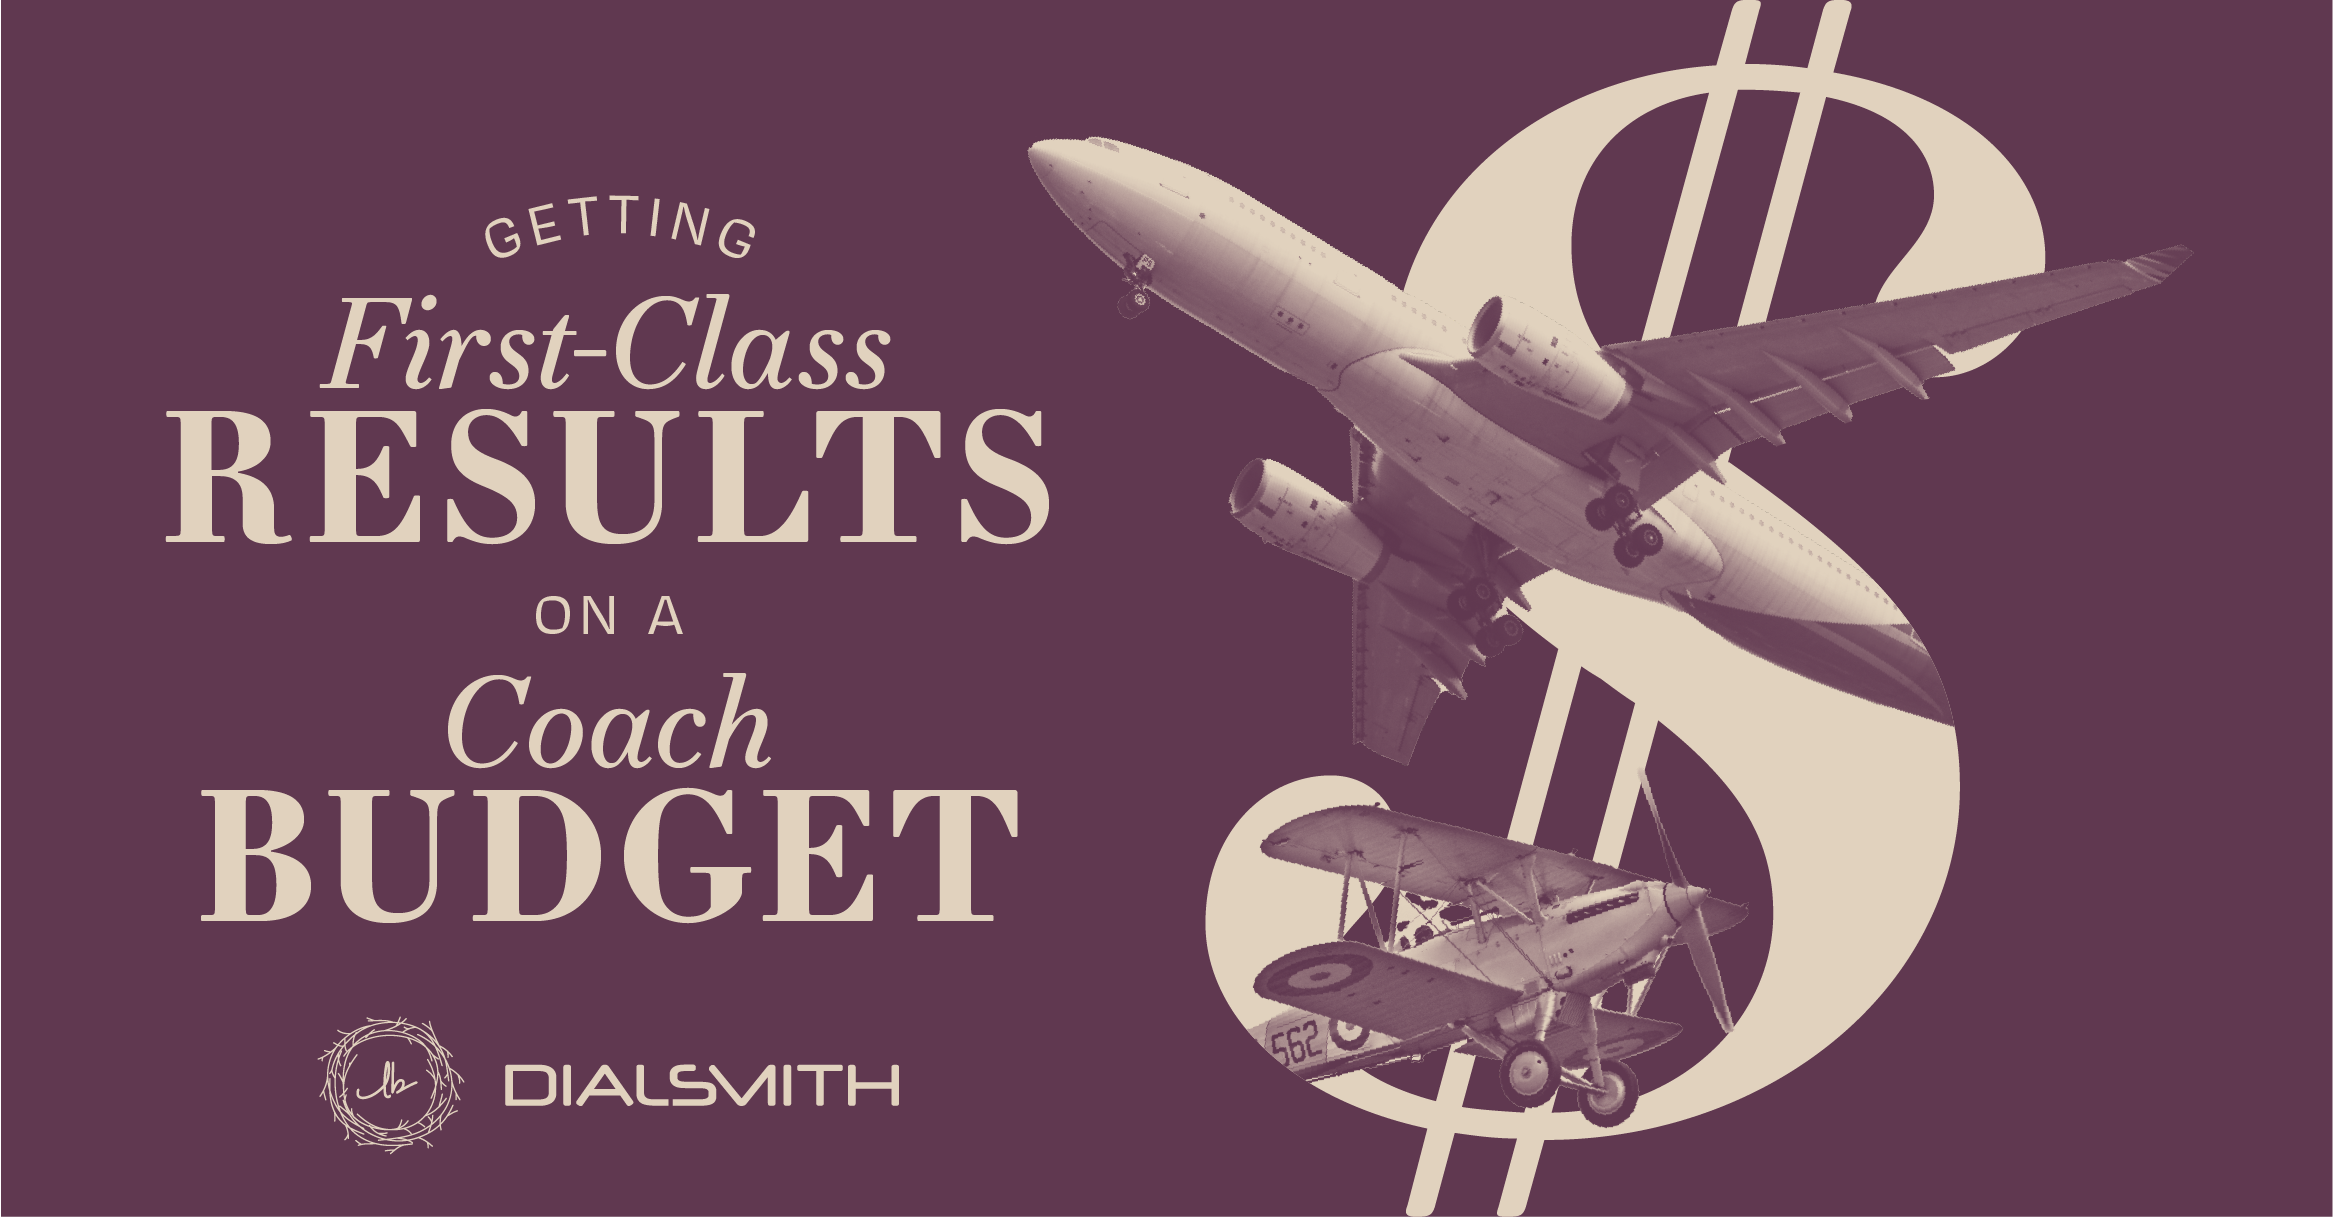 Getting First-Class Results on a Coach Budget